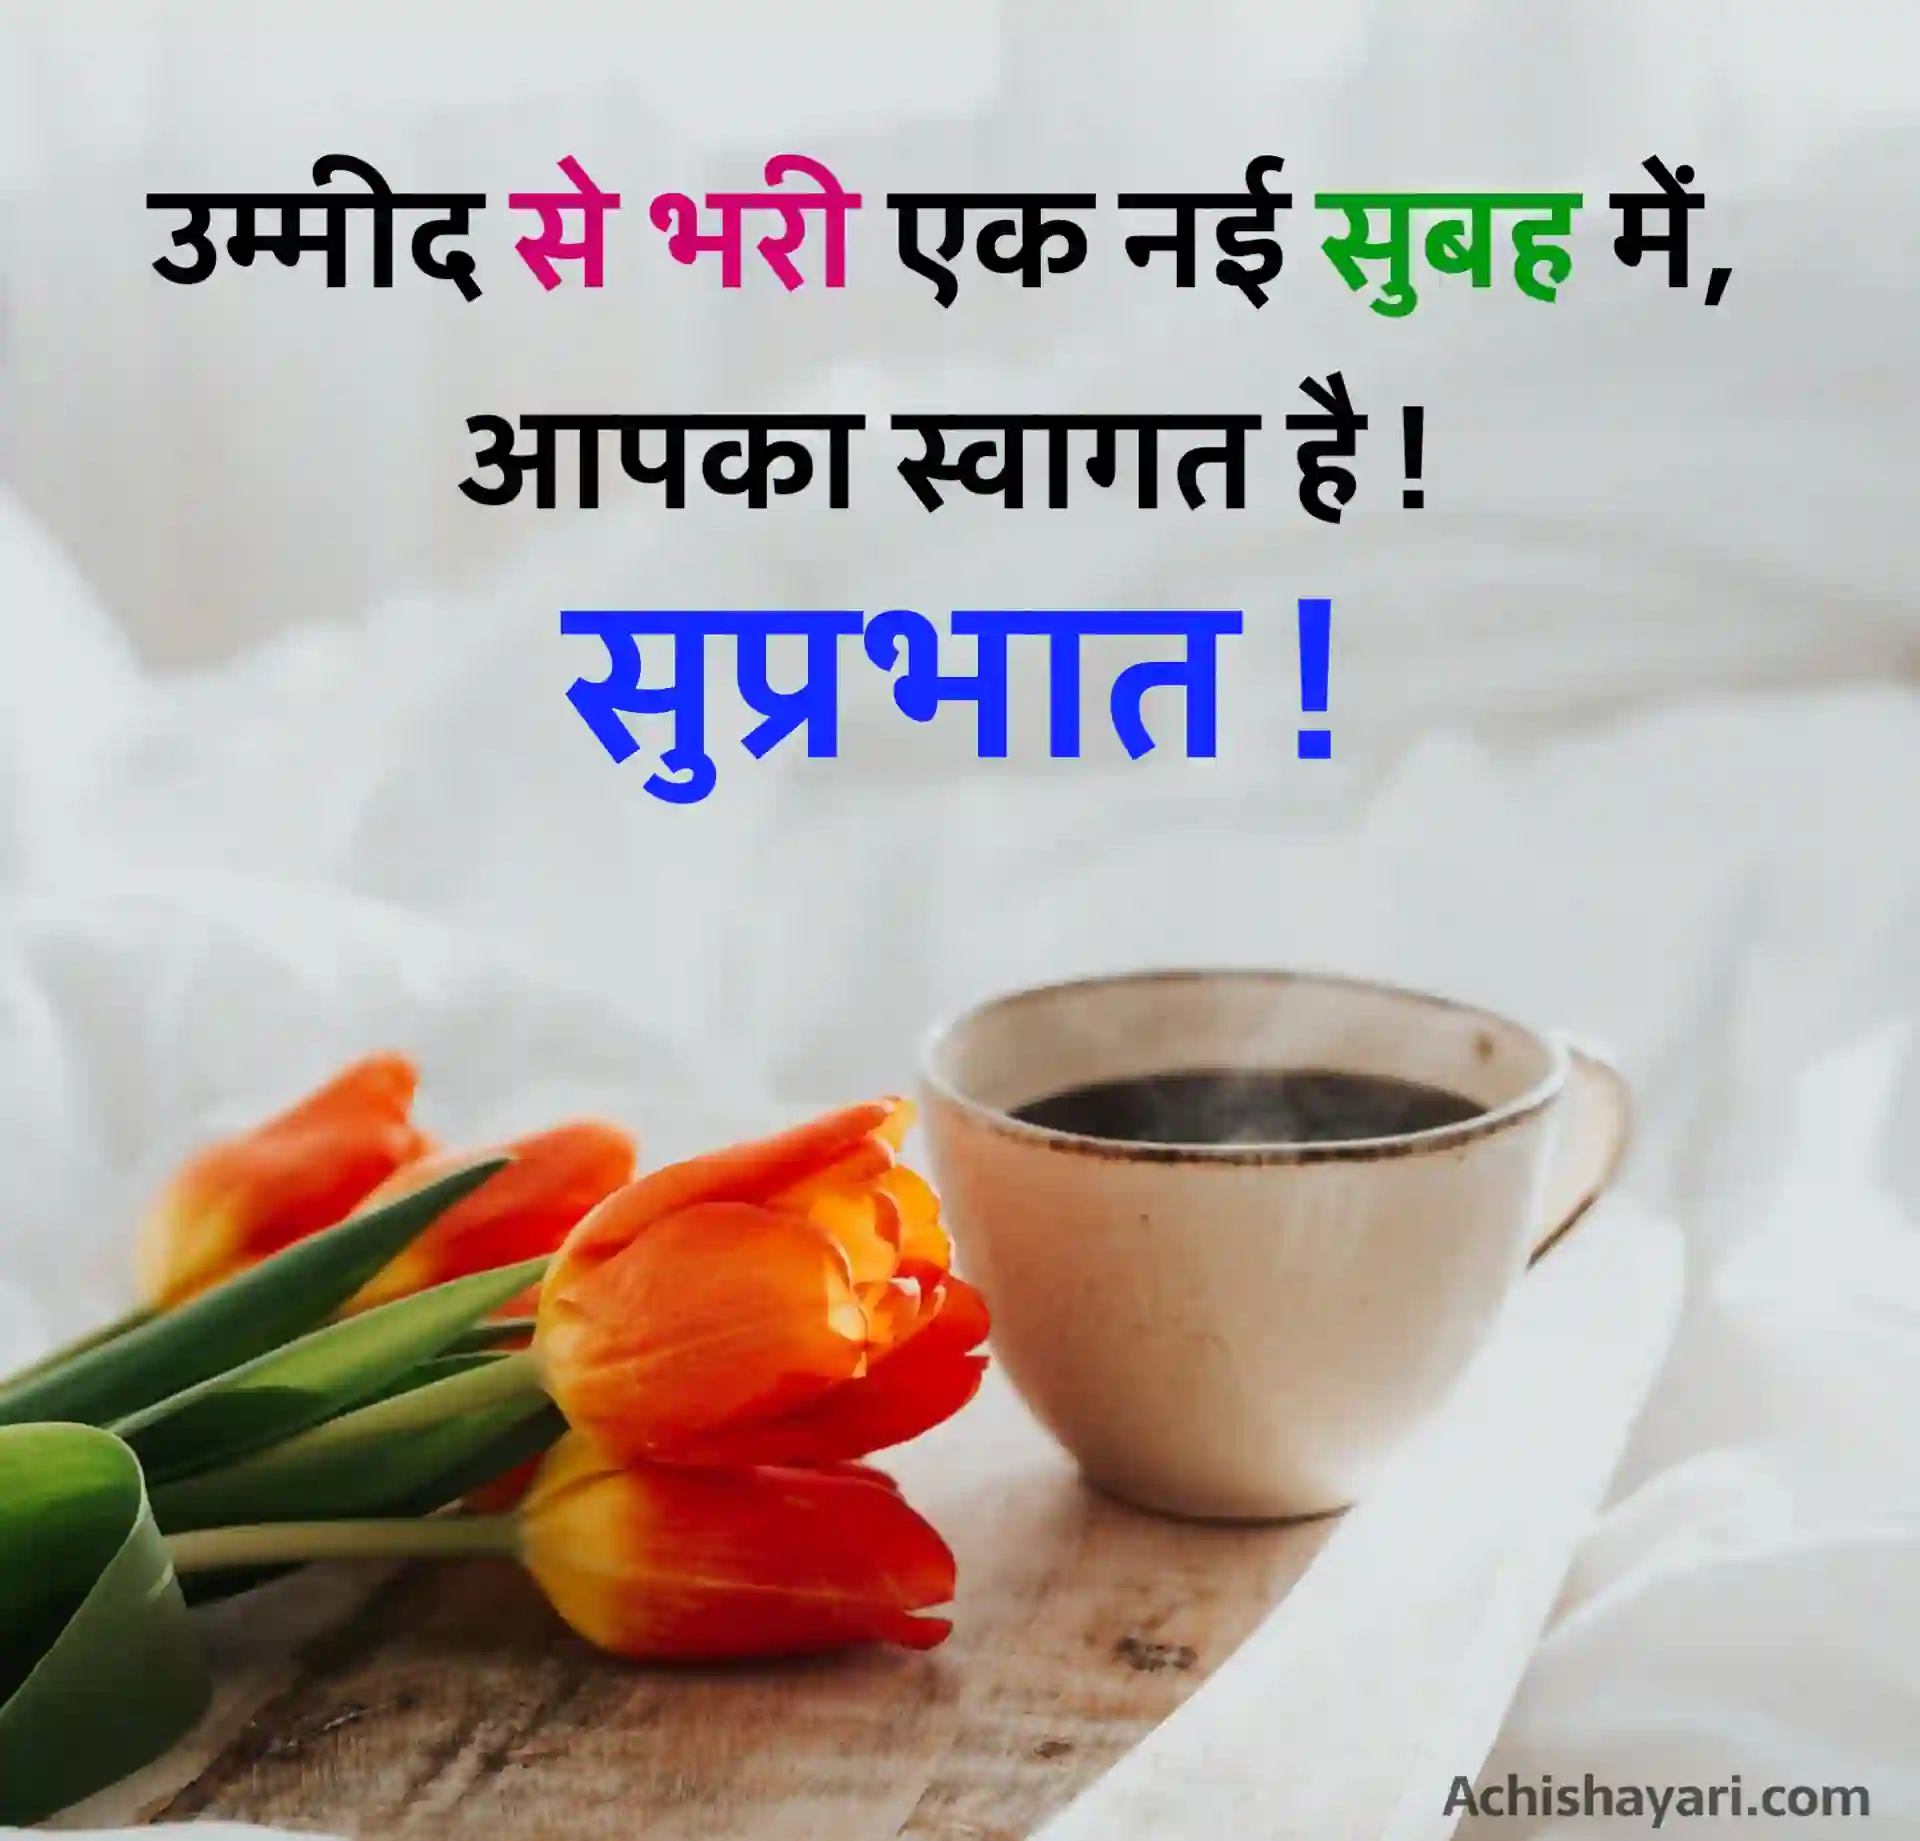 Good Morning Messages in Hindi